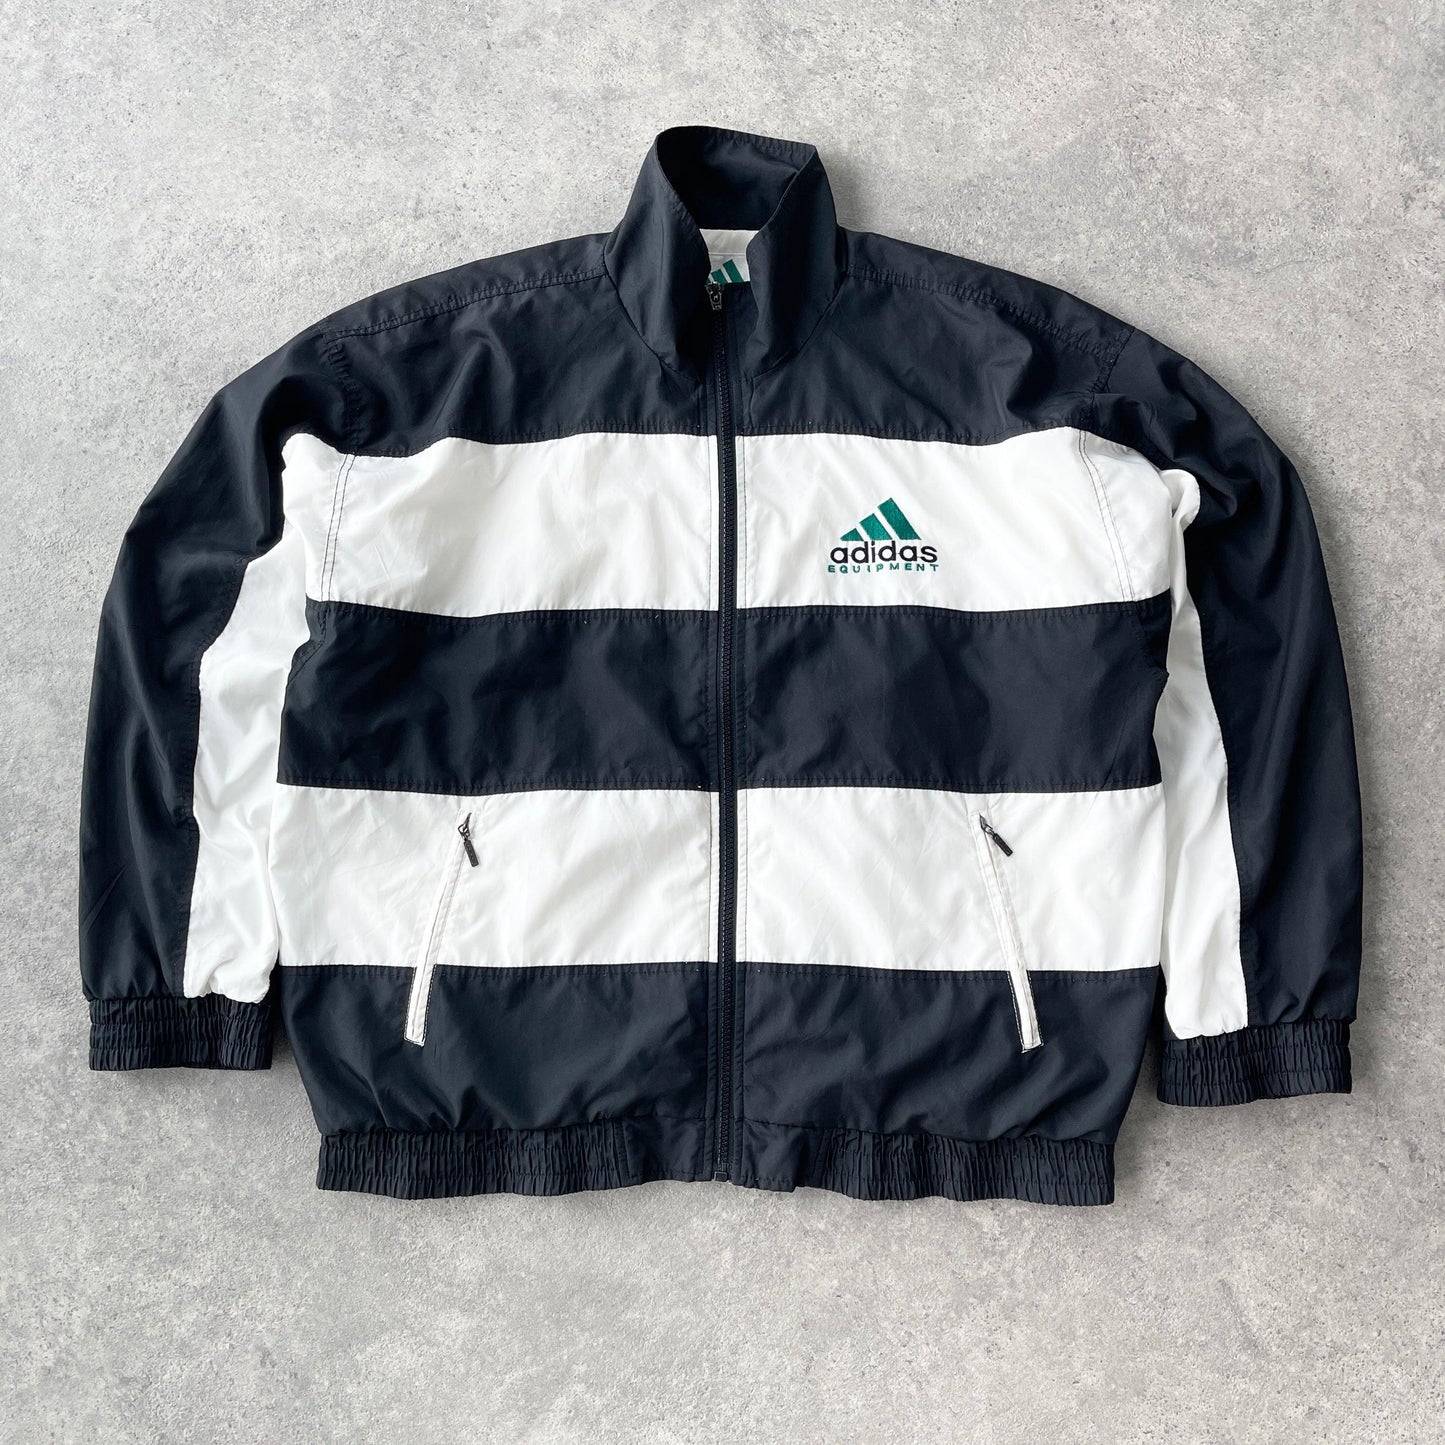 Adidas Equipment 1990s striped embroidered shell jacket (M) - Known Source